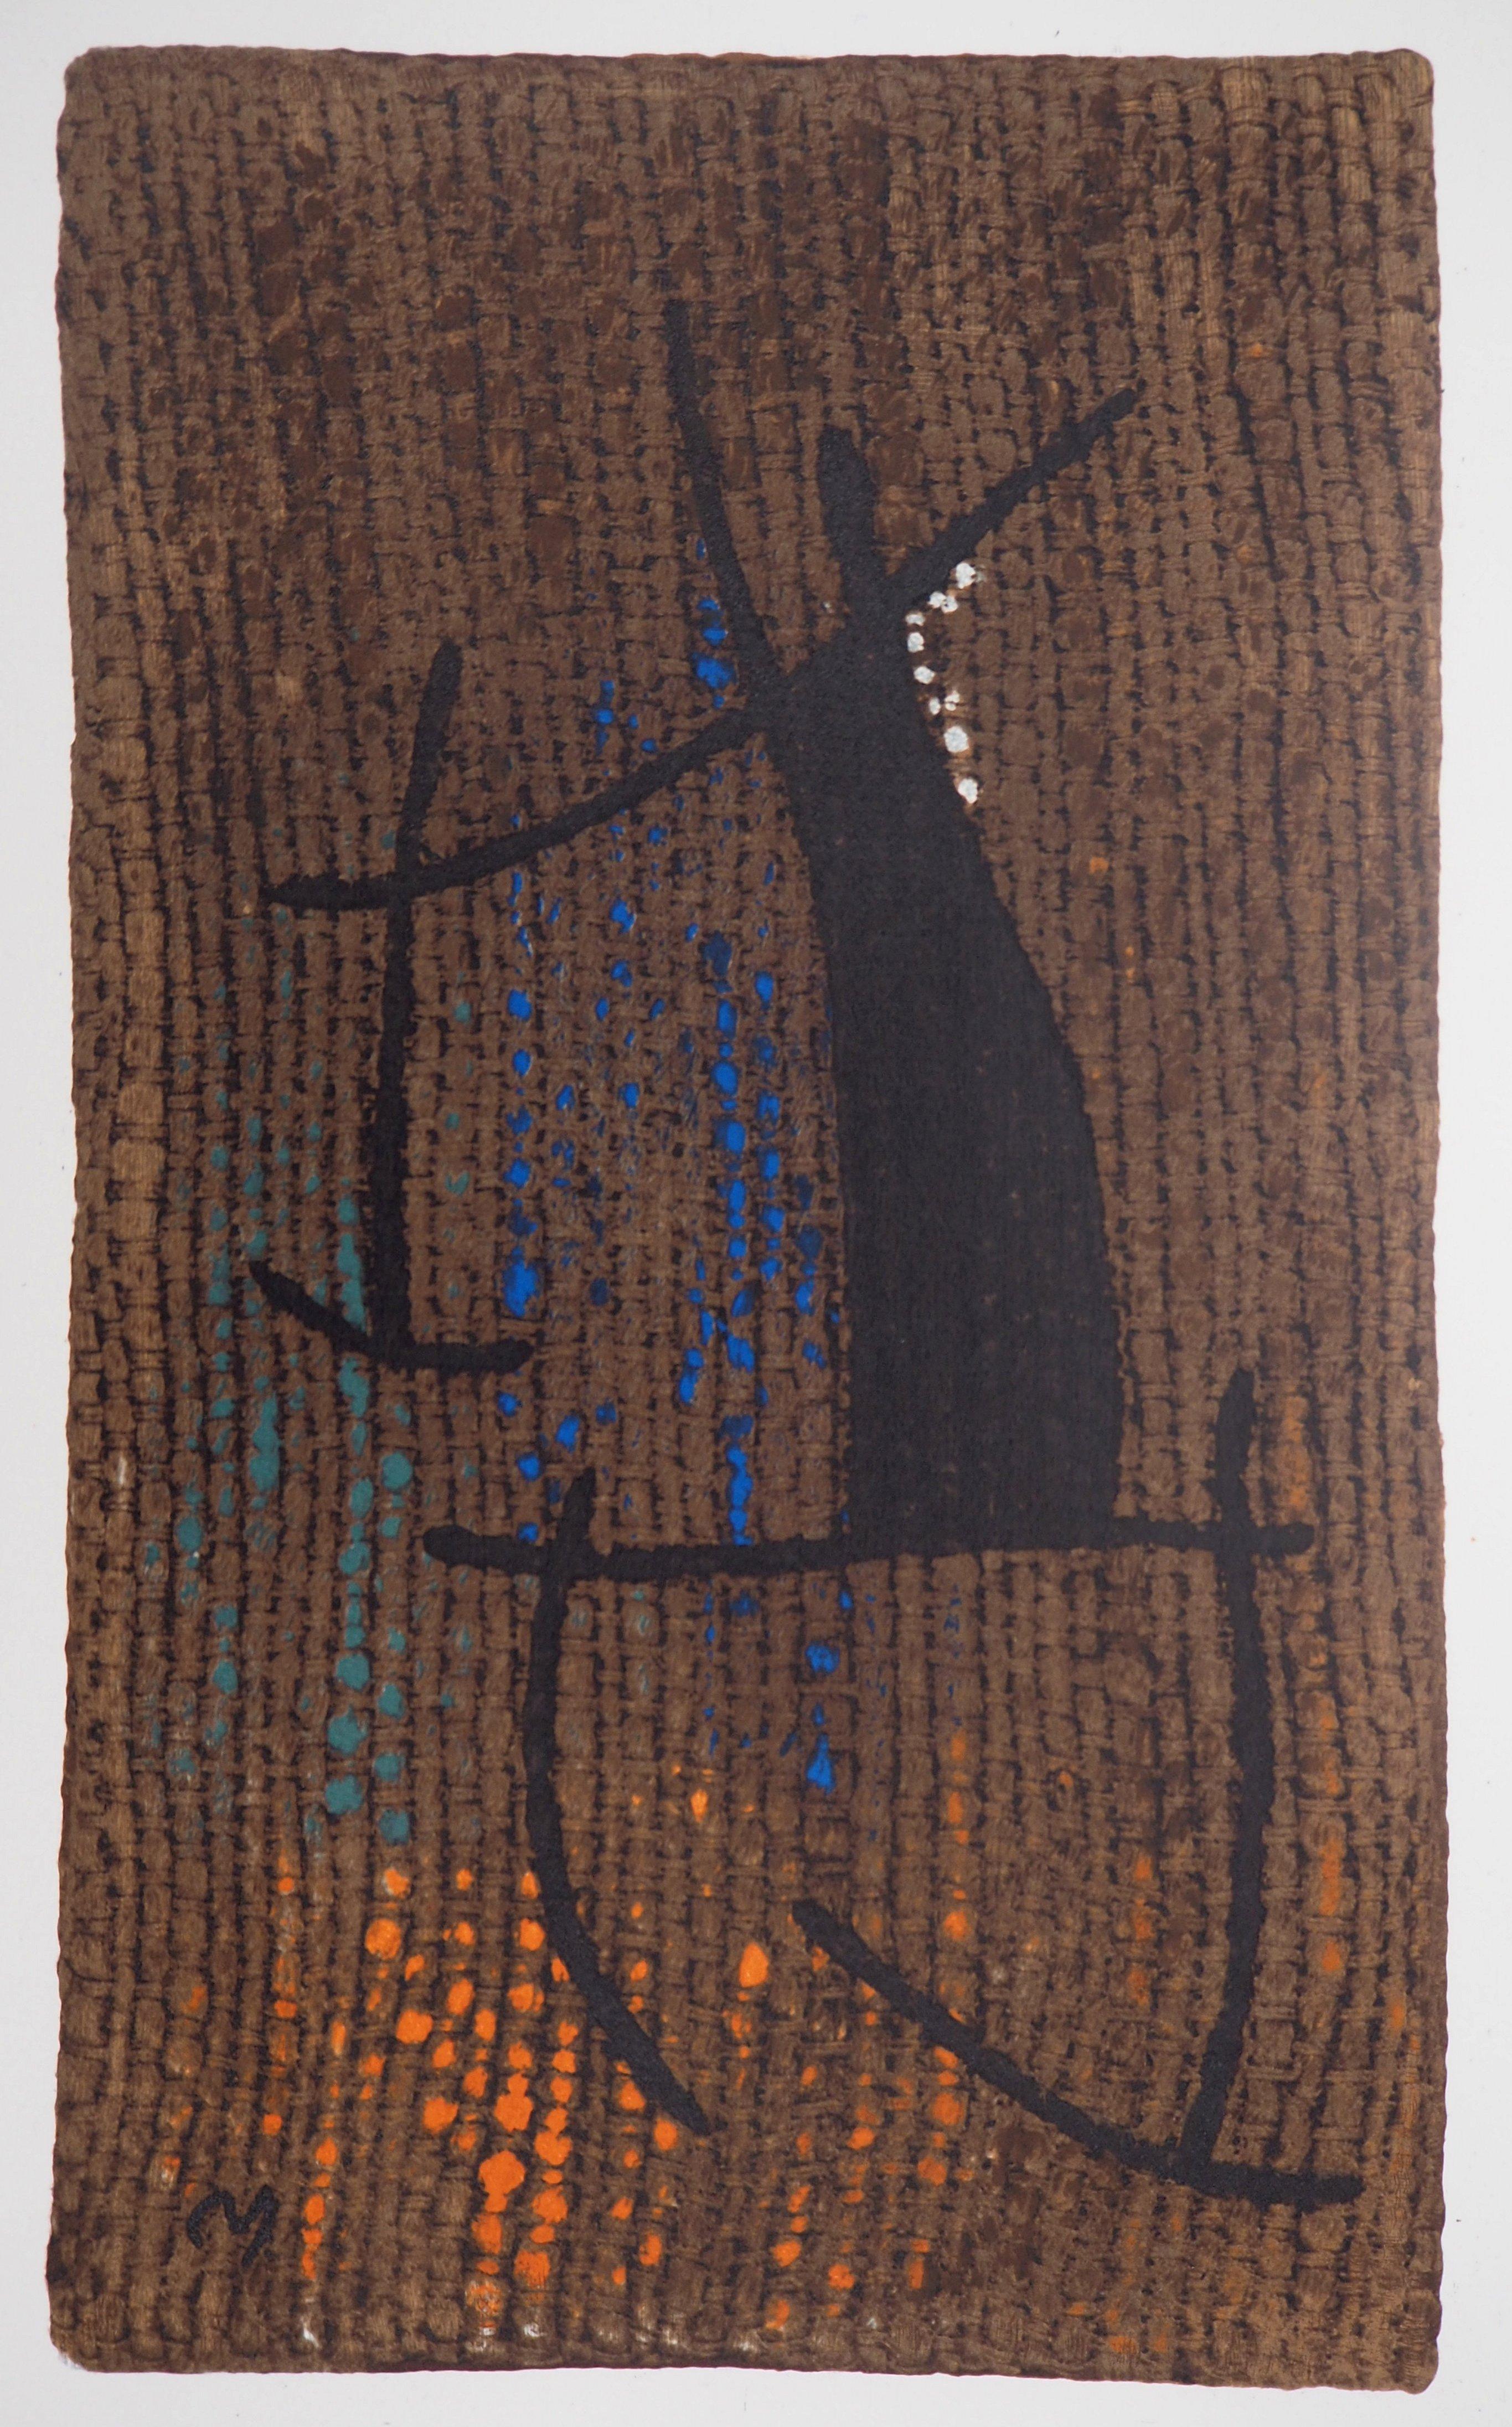 Joan Miró Abstract Print - Woman on Brown Background - Lithograph (Maeght 1965)